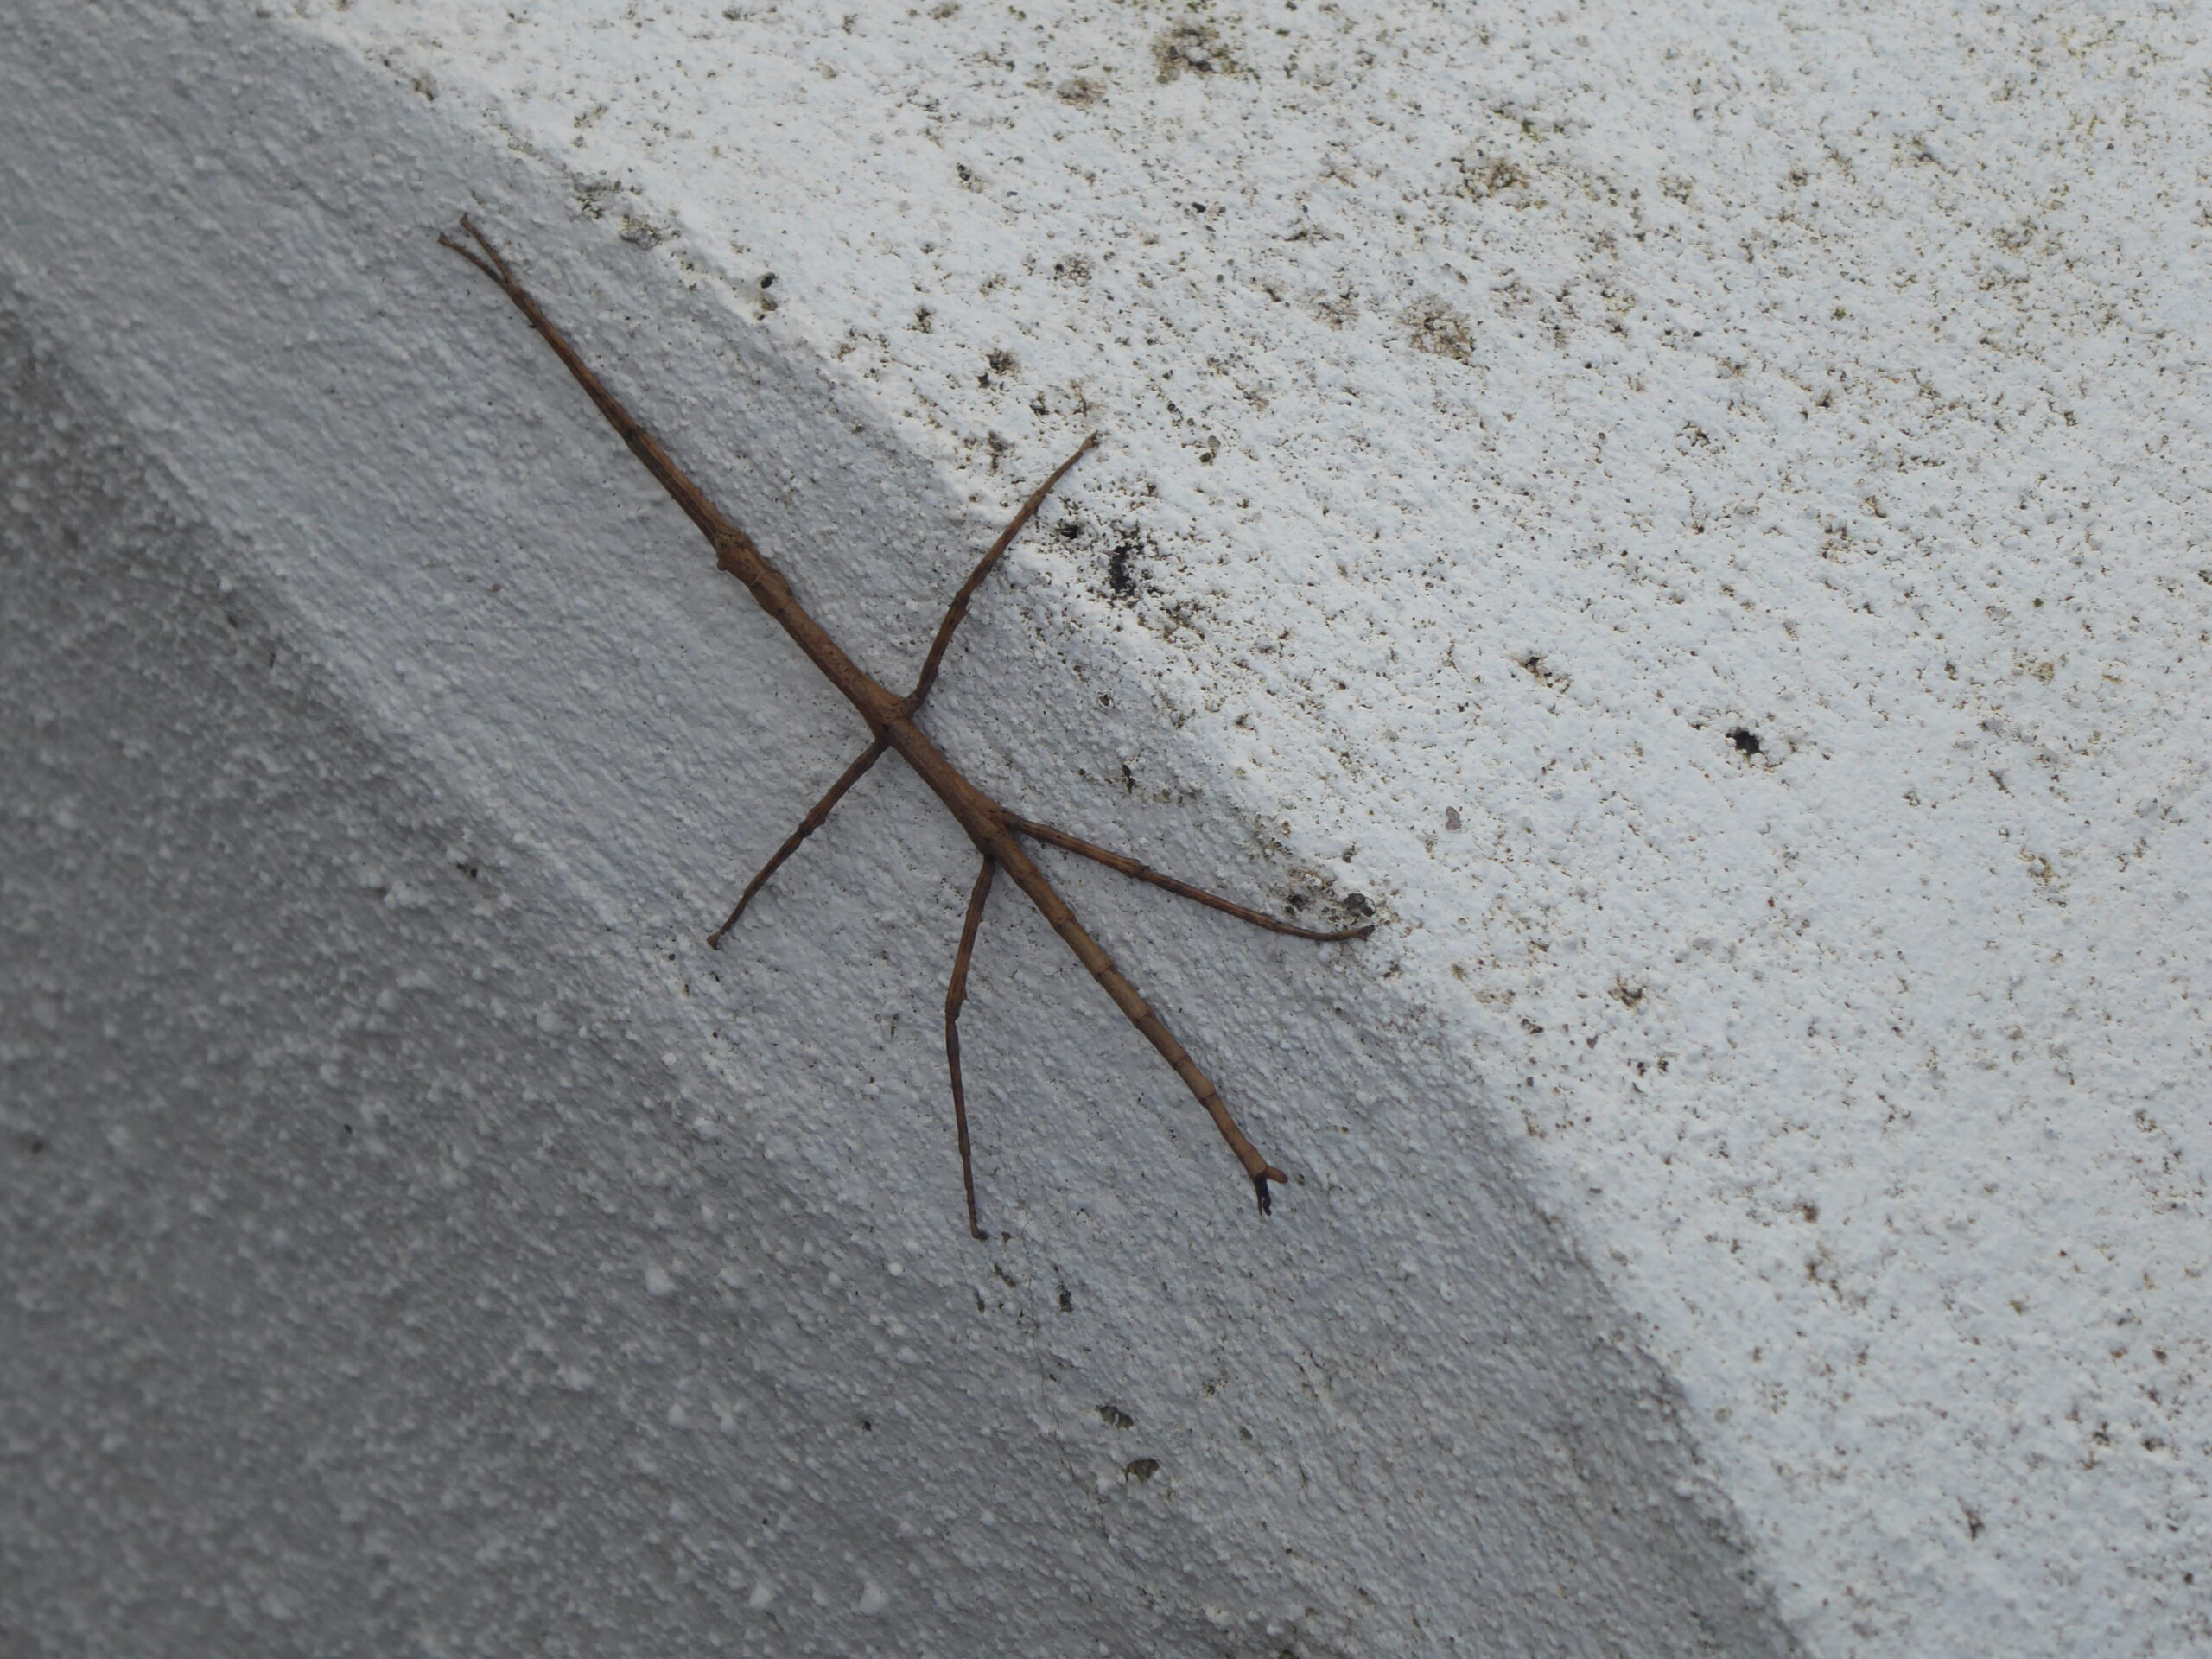 Unarmed Stick-insect (Acanthoxyla inermis)